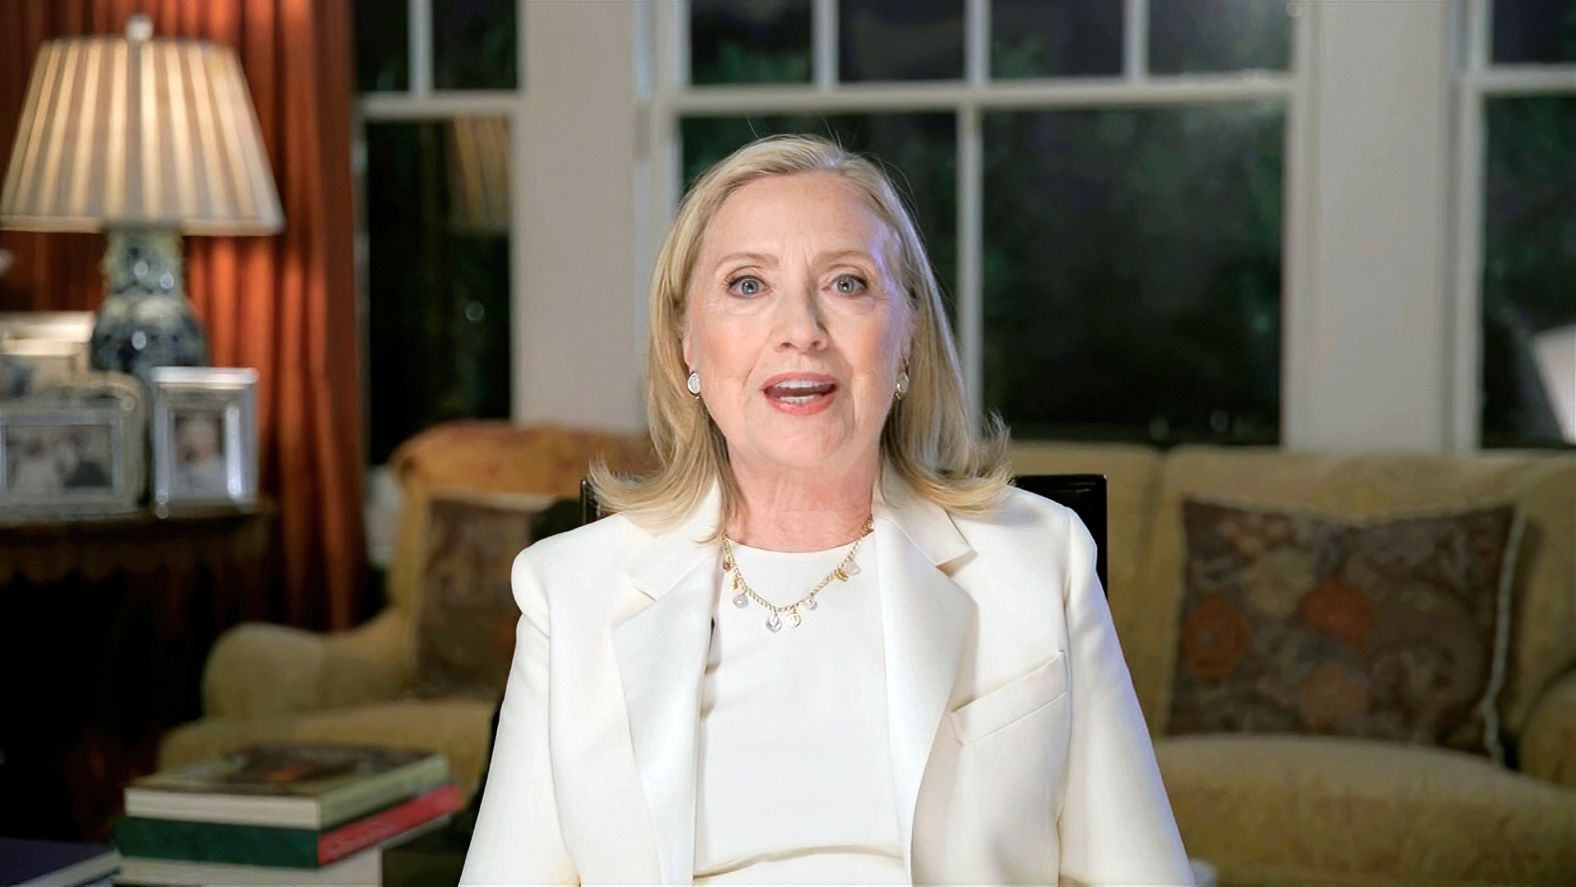 Hillary Clinton, who lost to Trump four years ago, urged voters not to take the President's political standing for granted this year. "Joe and Kamala can win 3 million more votes and still lose. Take it from me," <a href="index.php?page=&url=https%3A%2F%2Fwww.cnn.com%2Fpolitics%2Flive-news%2Fdnc-2020-day-3%2Fh_e30b4bc9384da5d1a74a44cd240fd613" target="_blank">Clinton said.</a> "We need numbers so overwhelming Trump can't sneak or steal his way to victory."